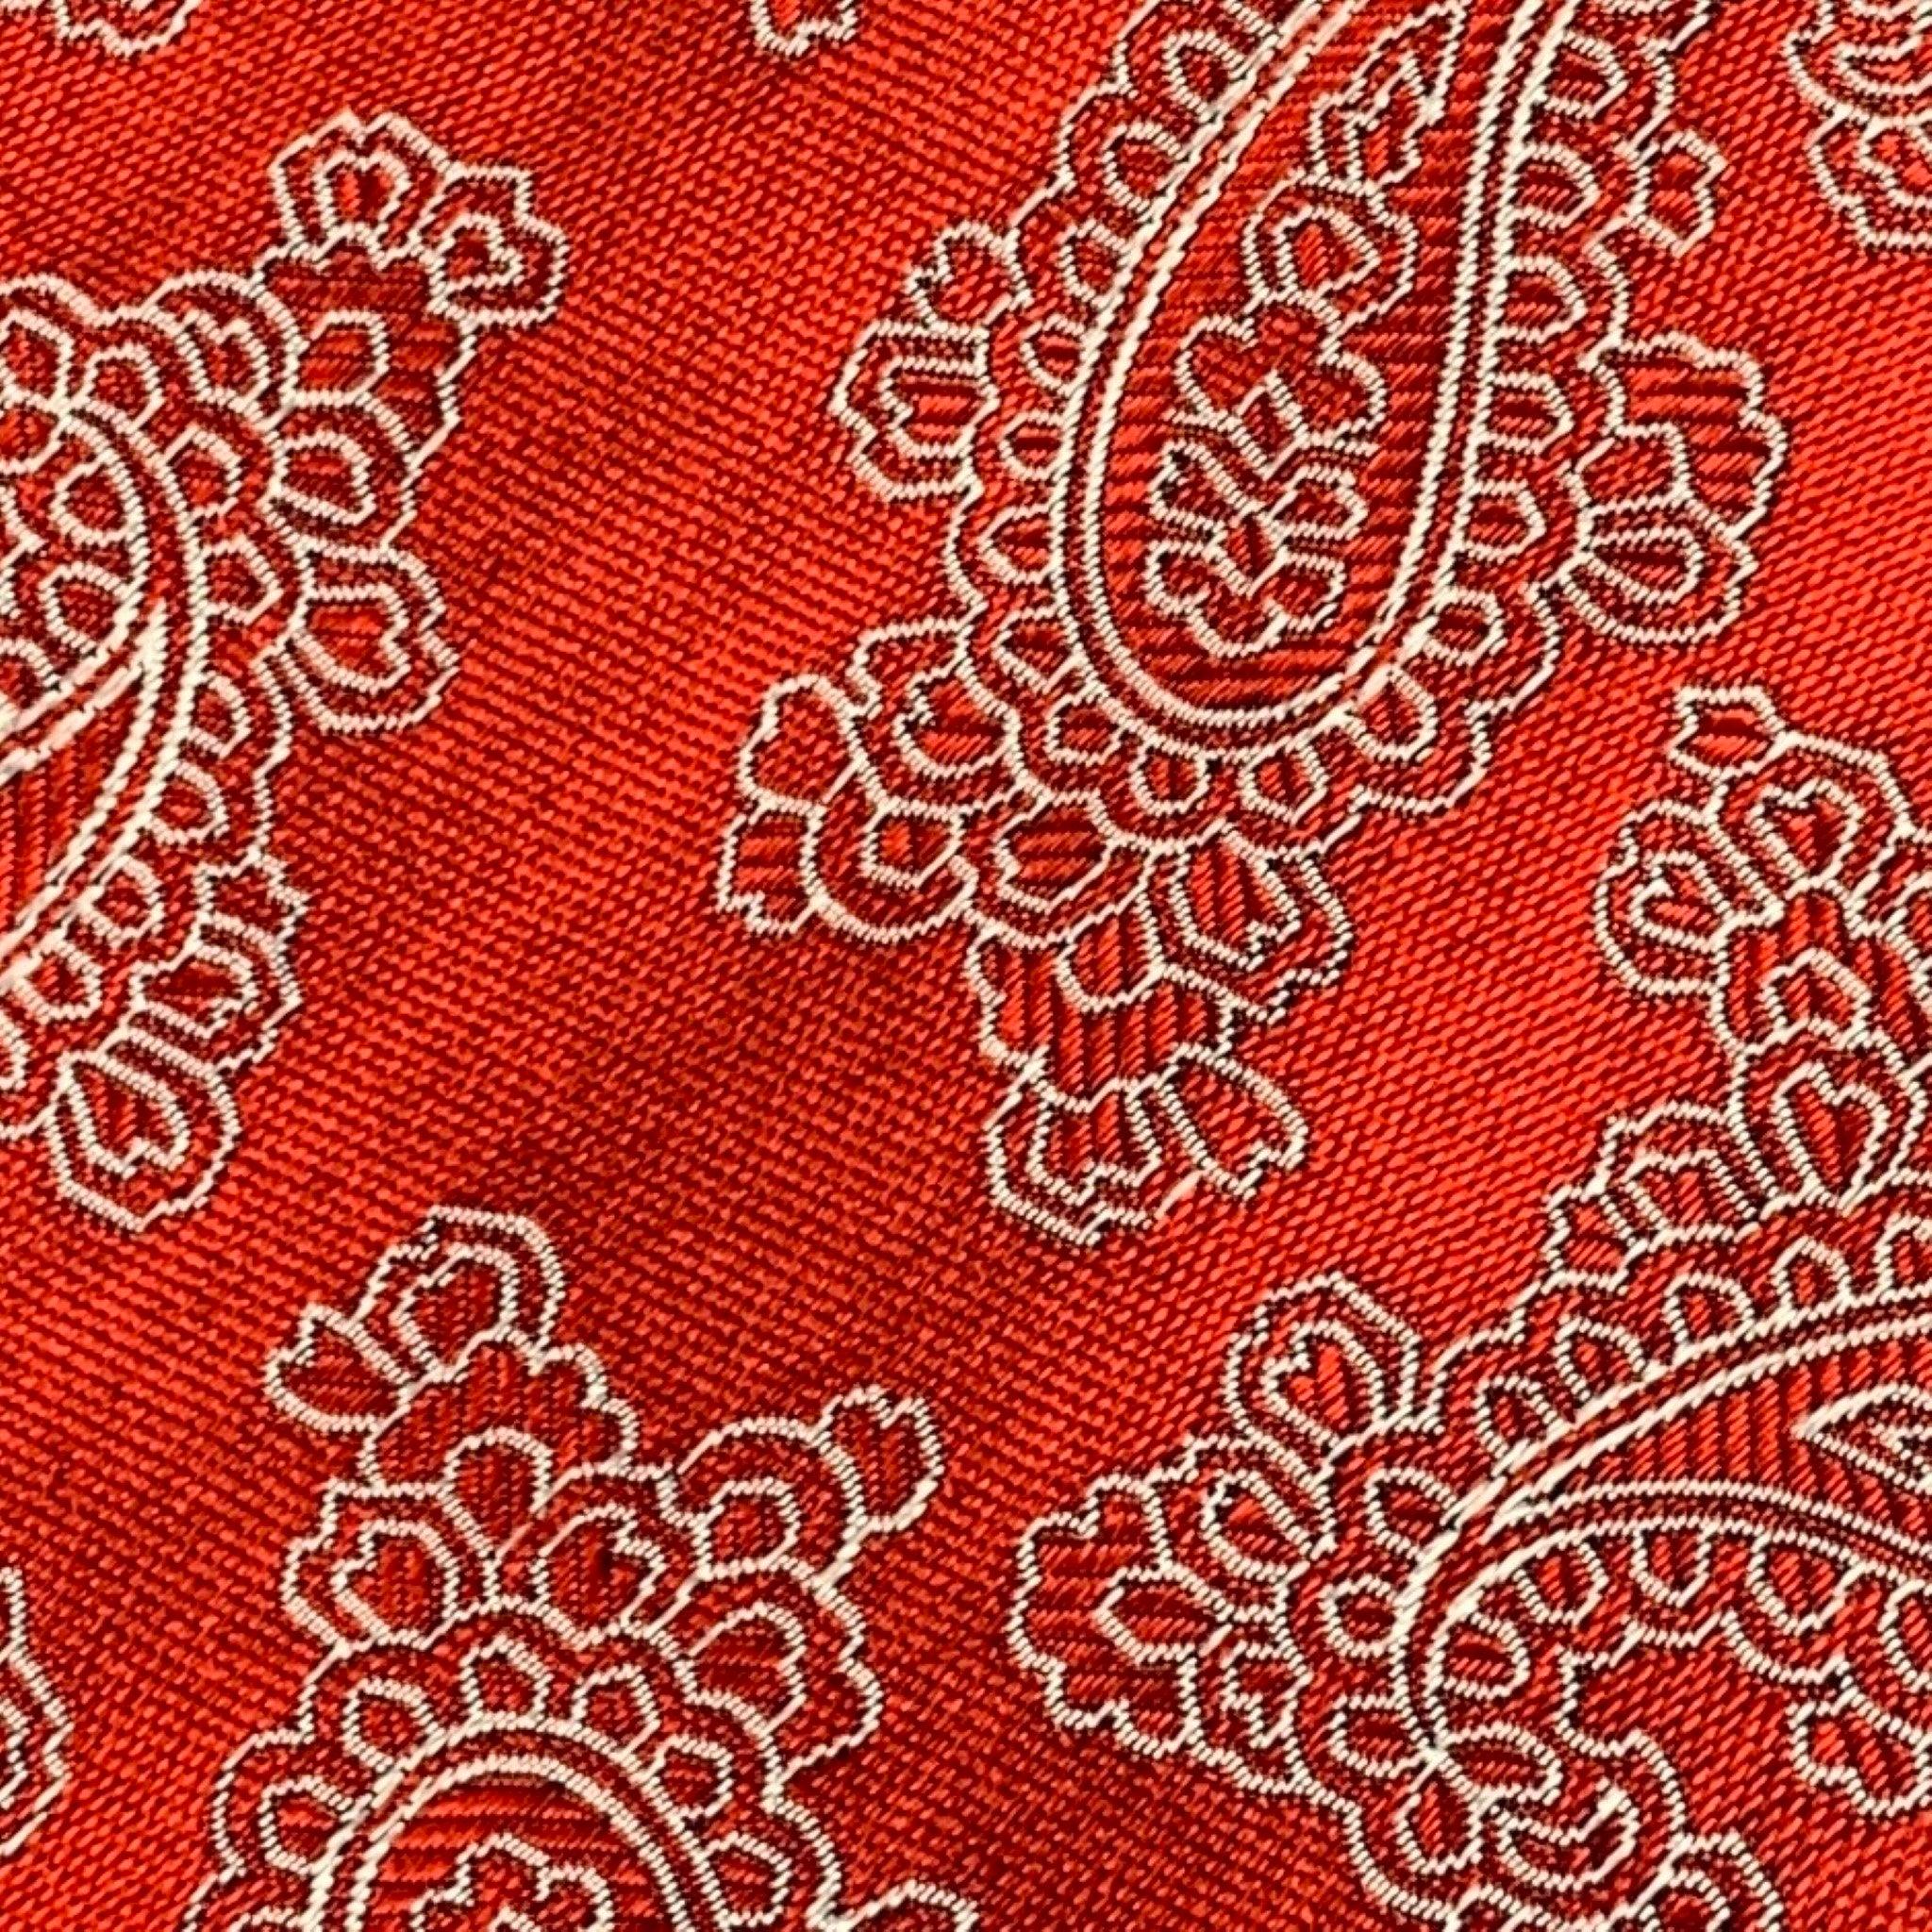 ETRO Red White Paisley Silk Jacquard Tie In Good Condition For Sale In San Francisco, CA